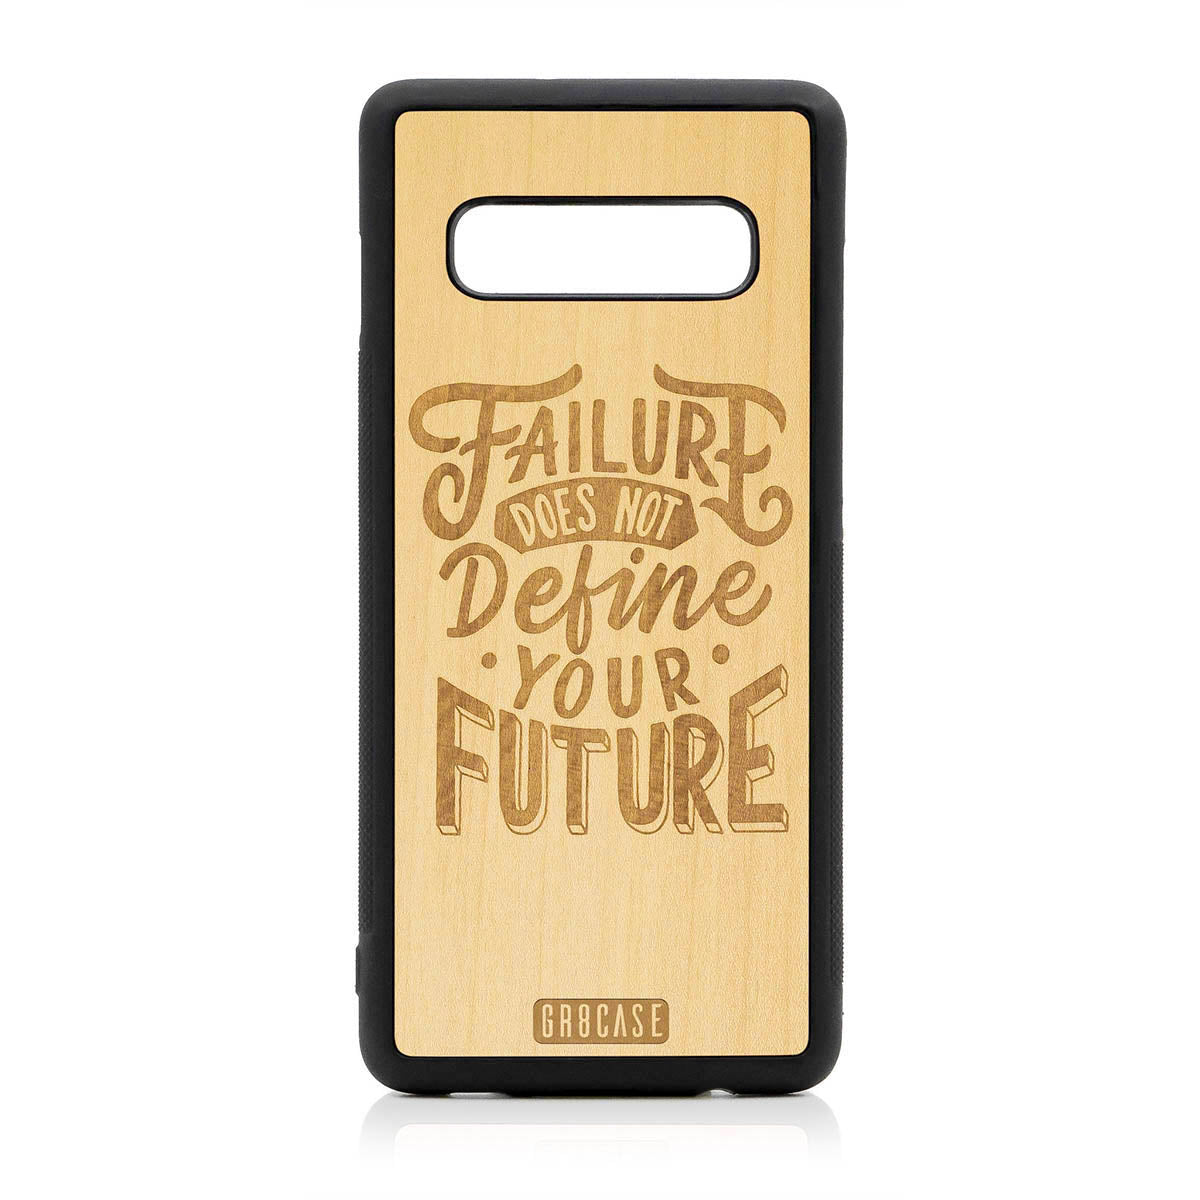 Failure Does Not Define You Future Design Wood Case For Samsung Galaxy S10 Plus by GR8CASE